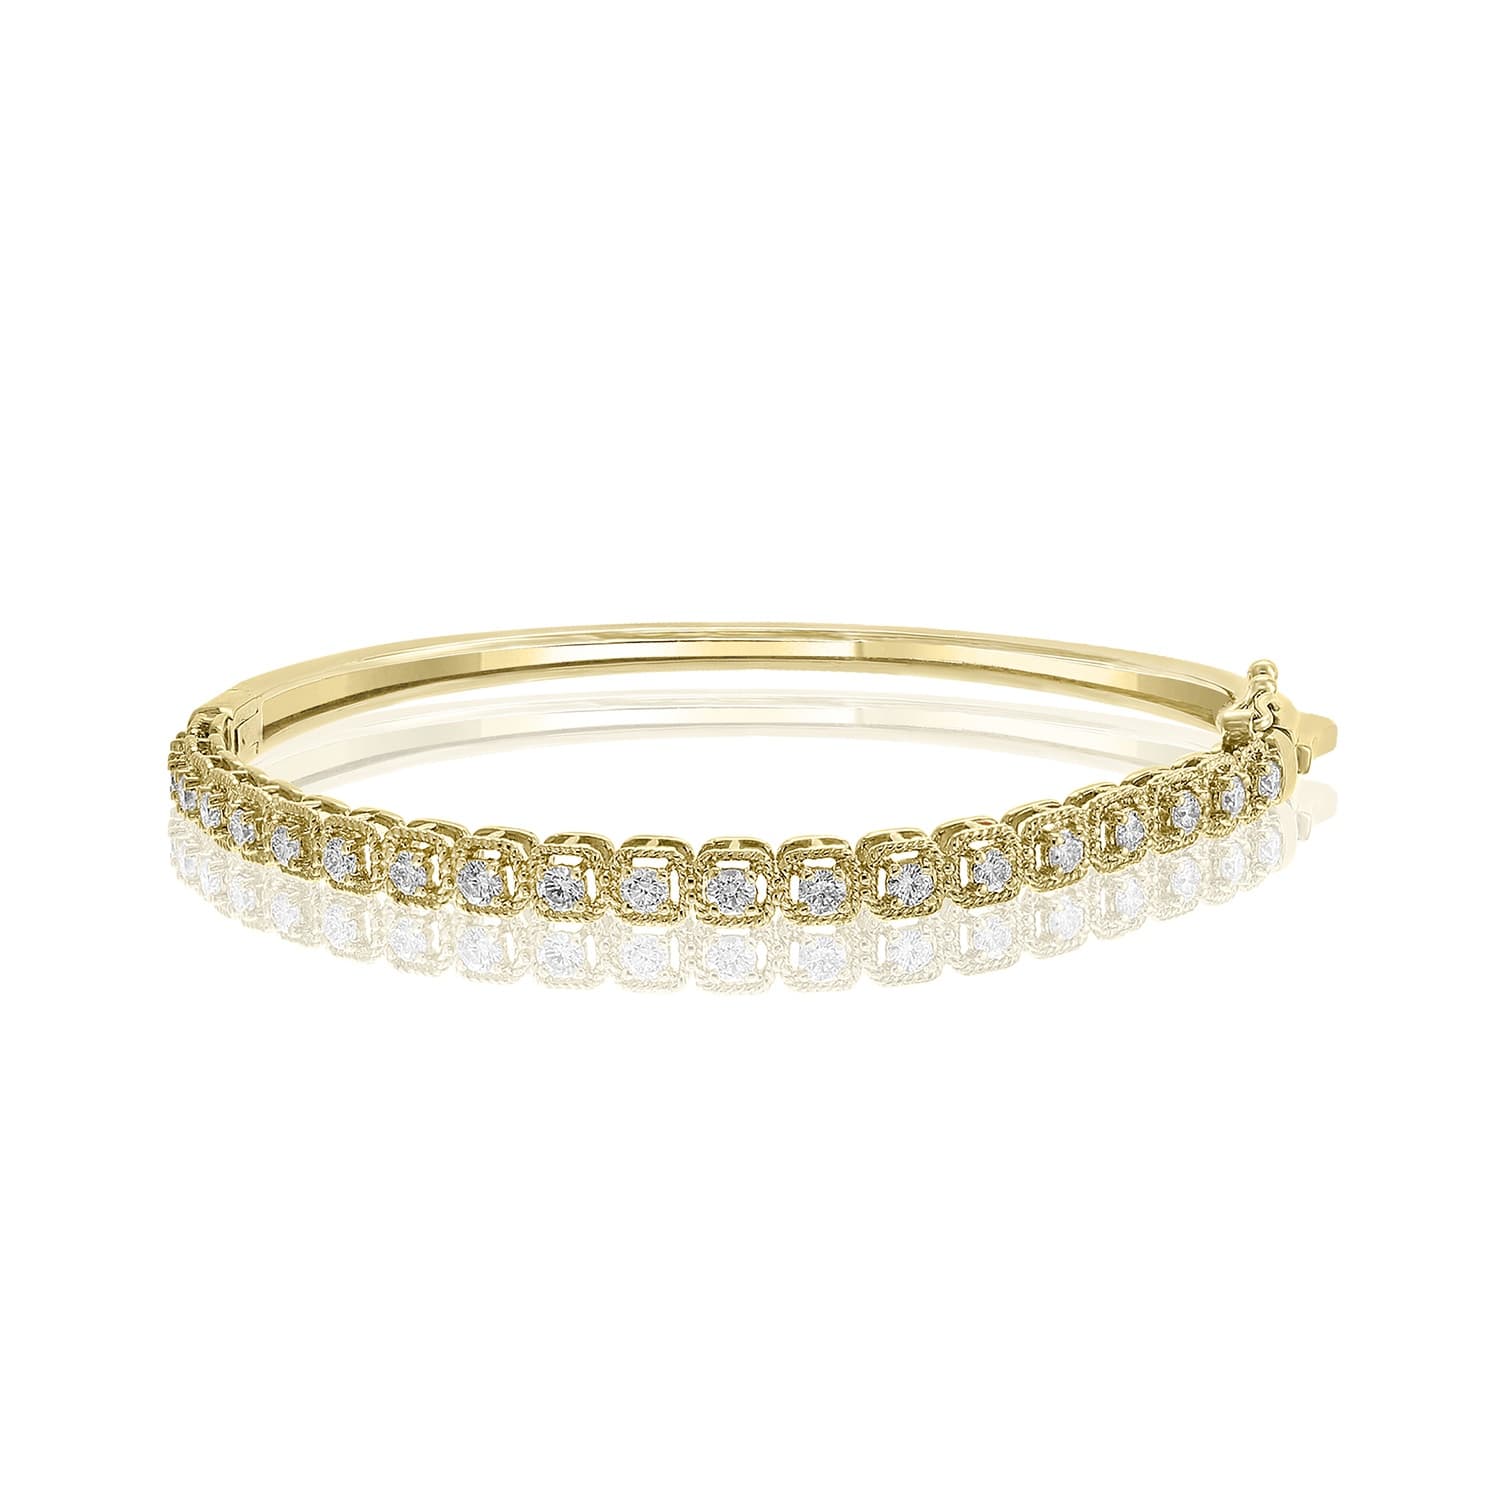 Yellow Gold Diamond Bangle Bracelet with Rope Detail